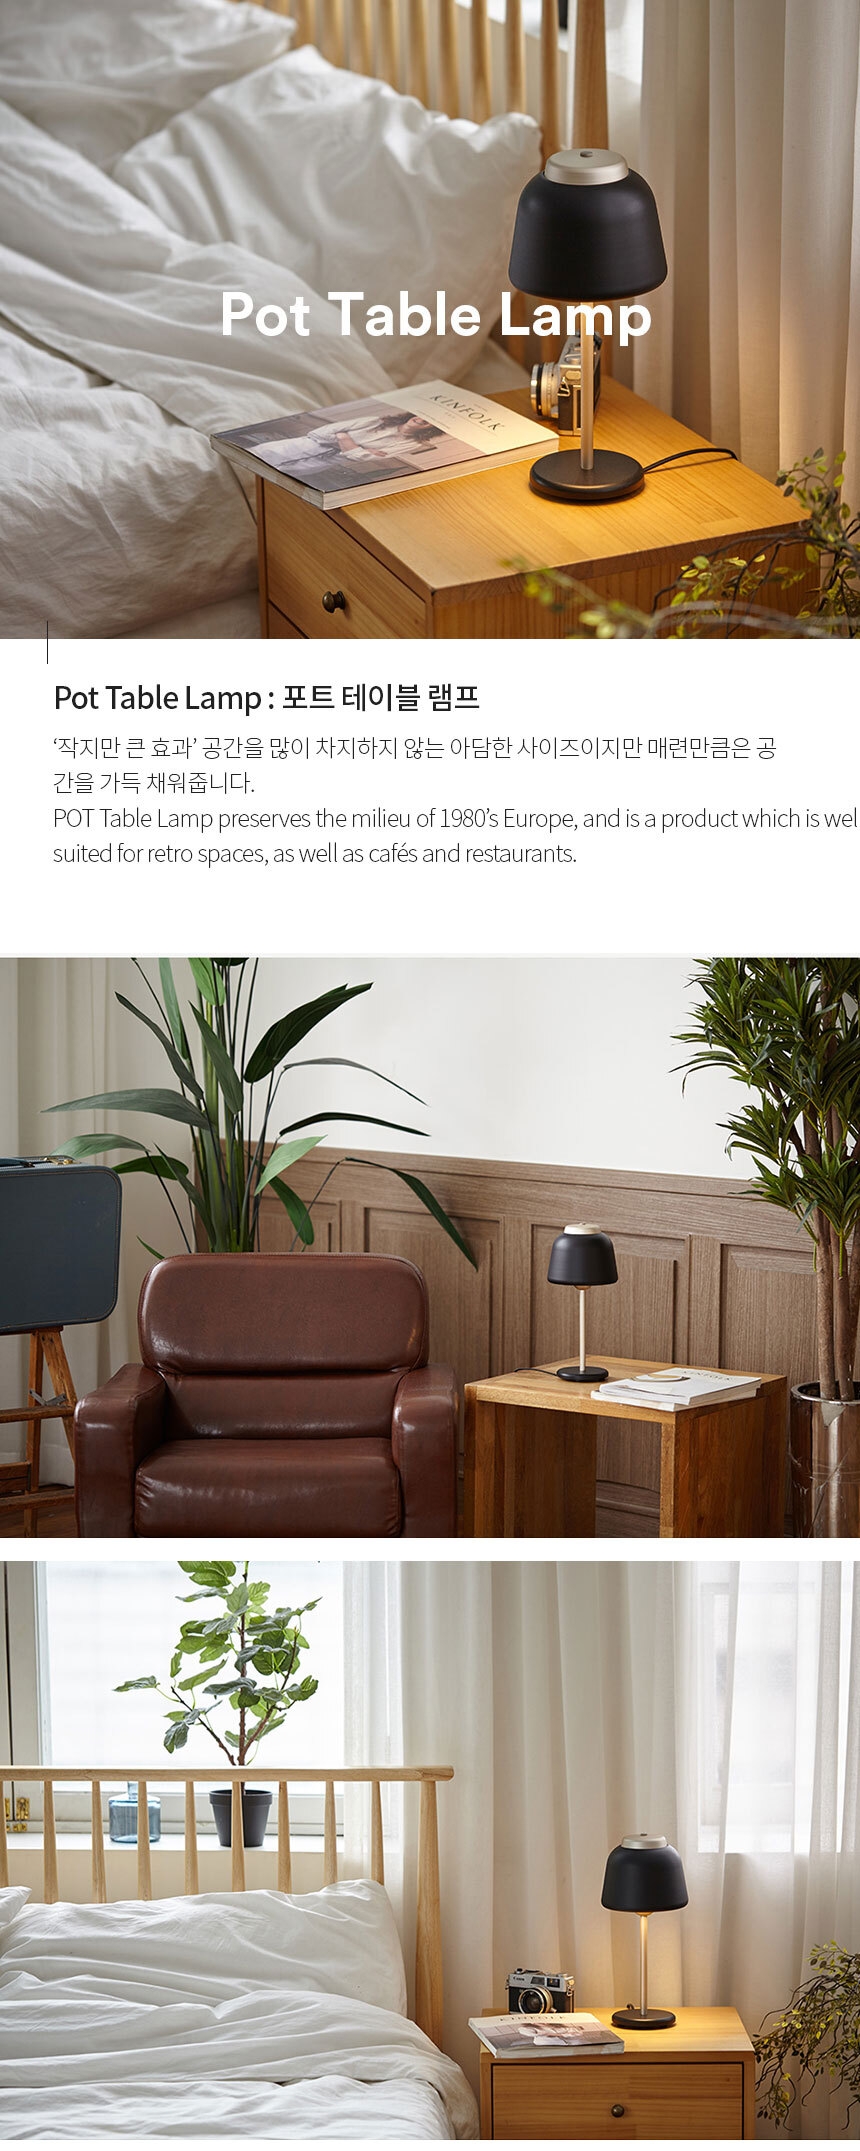 Pot Table Lamp : 포트 테이블 램프 ‘작지만 큰 효과’ 공간을 많이 차지하지 않는 아담한 사이즈이지만 매련만큼은 공
간을 가득 채워줍니다.
POT Table Lamp preserves the milieu of 1980’s Europe, and is a product which is well 
suited for retro spaces, as well as cafés and restaurants.